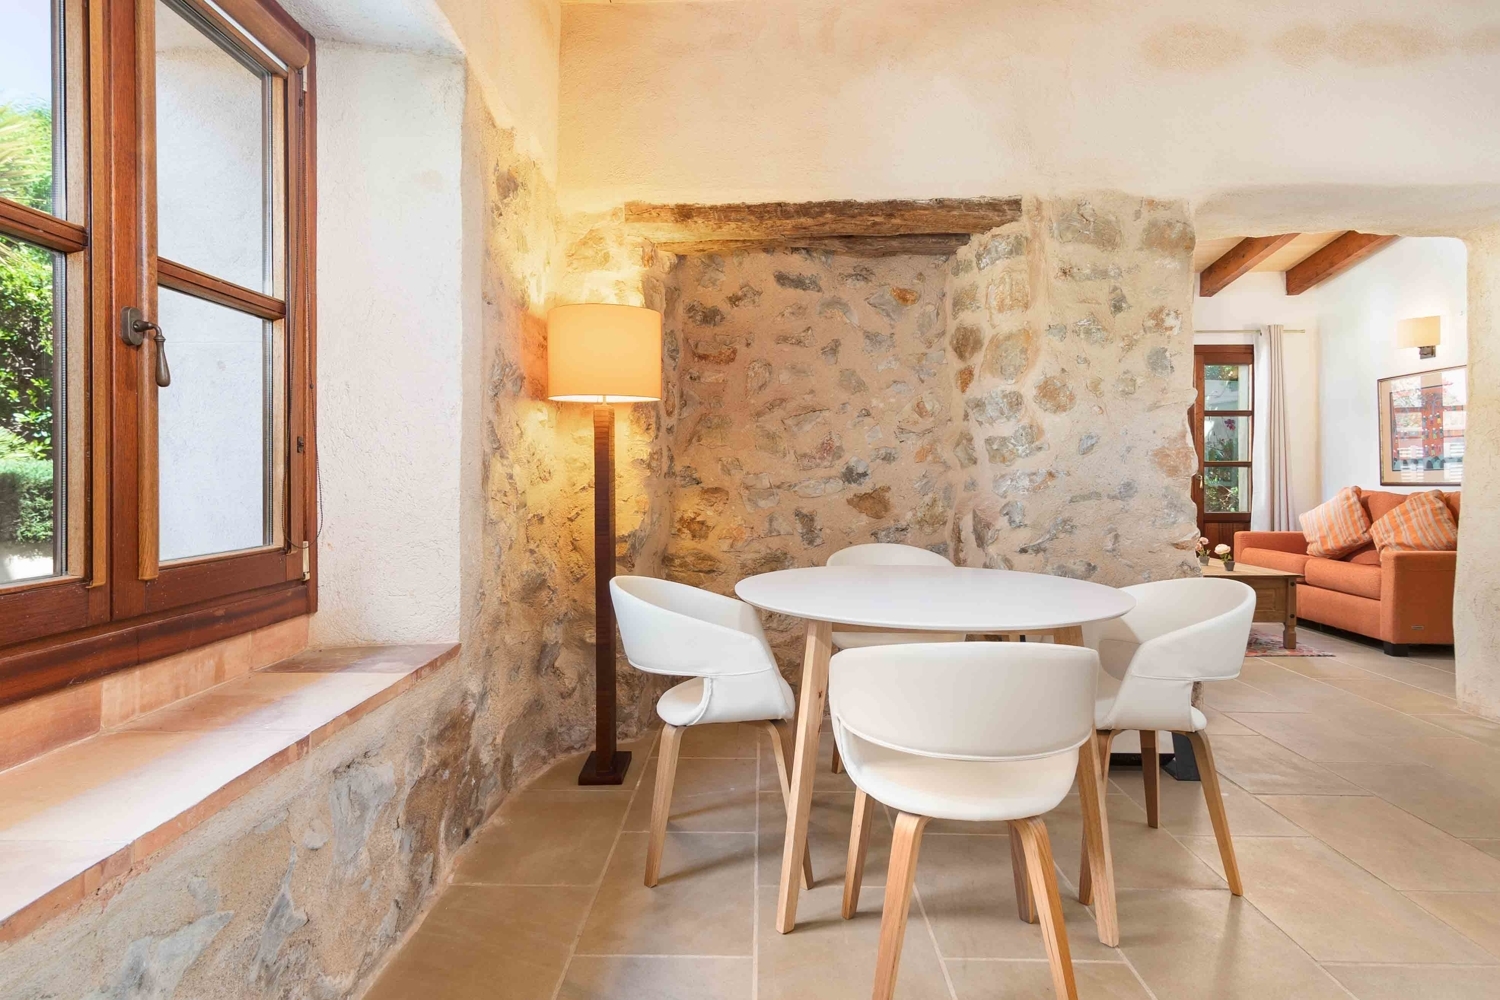 Mallorcan-style stone house located in Es Capdella